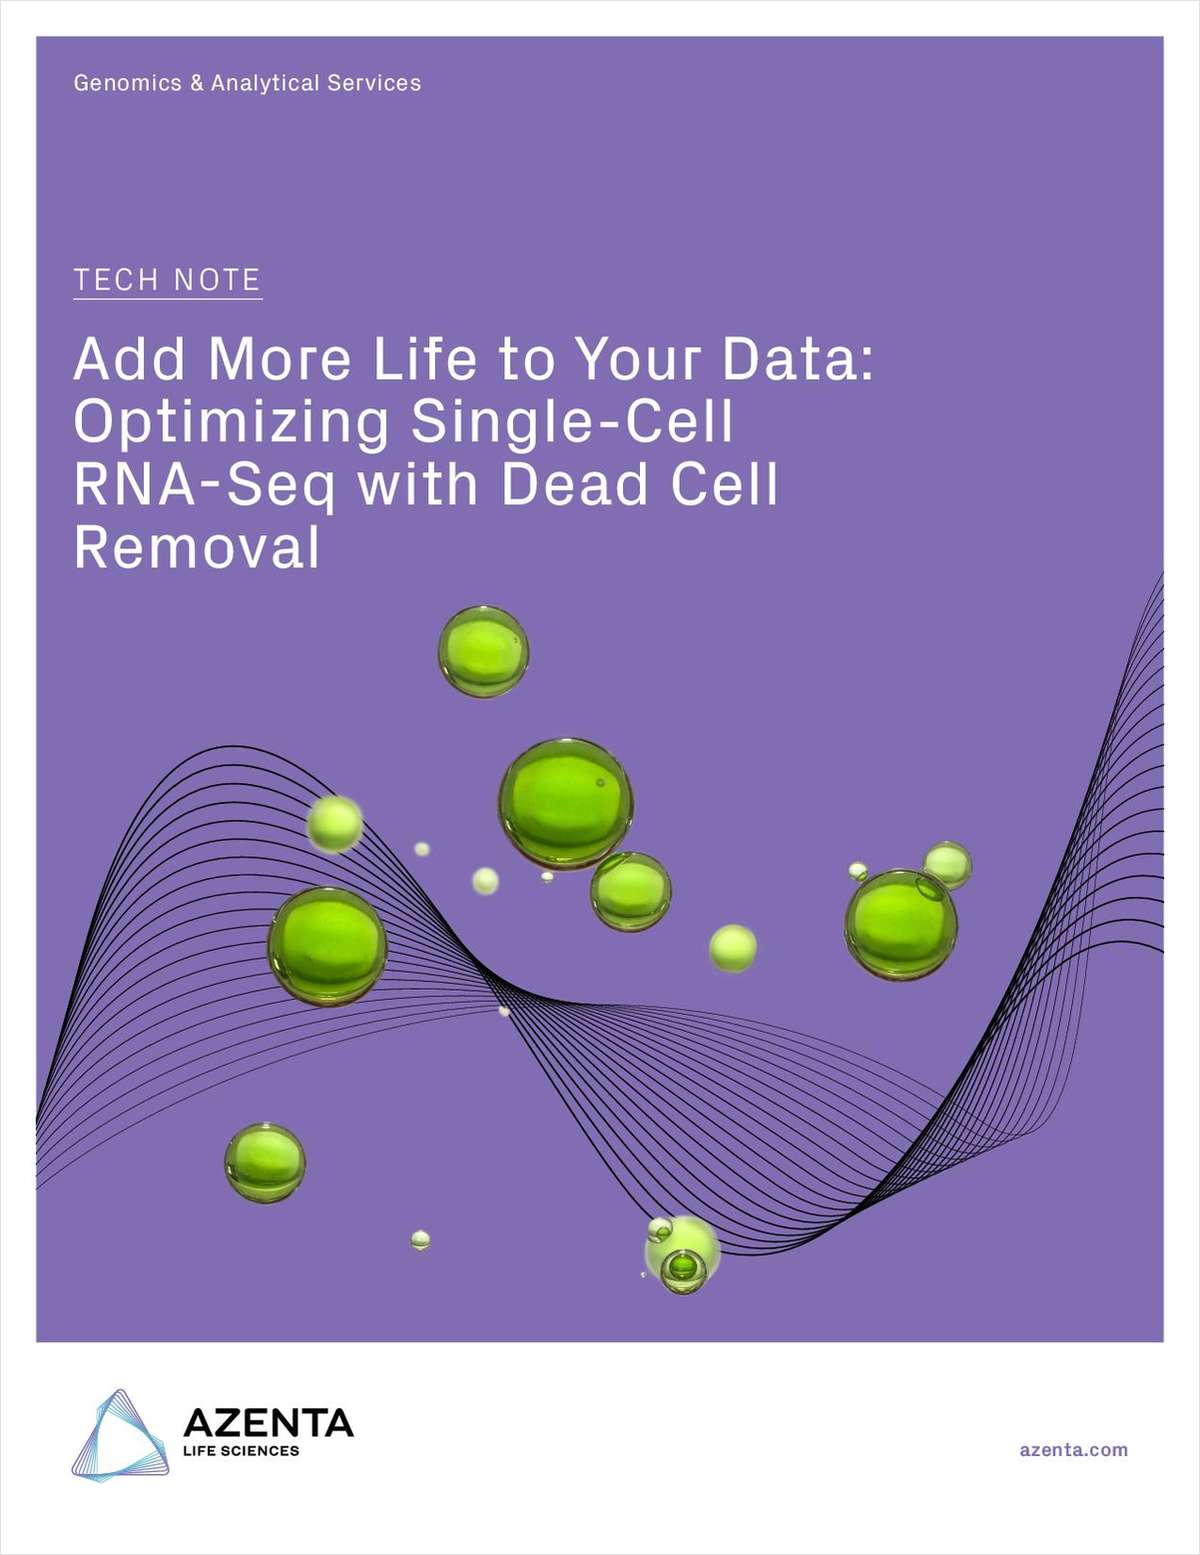 Add More Life to Your Data: Optimizing Single-Cell RNA-Seq with Dead Cell Removal